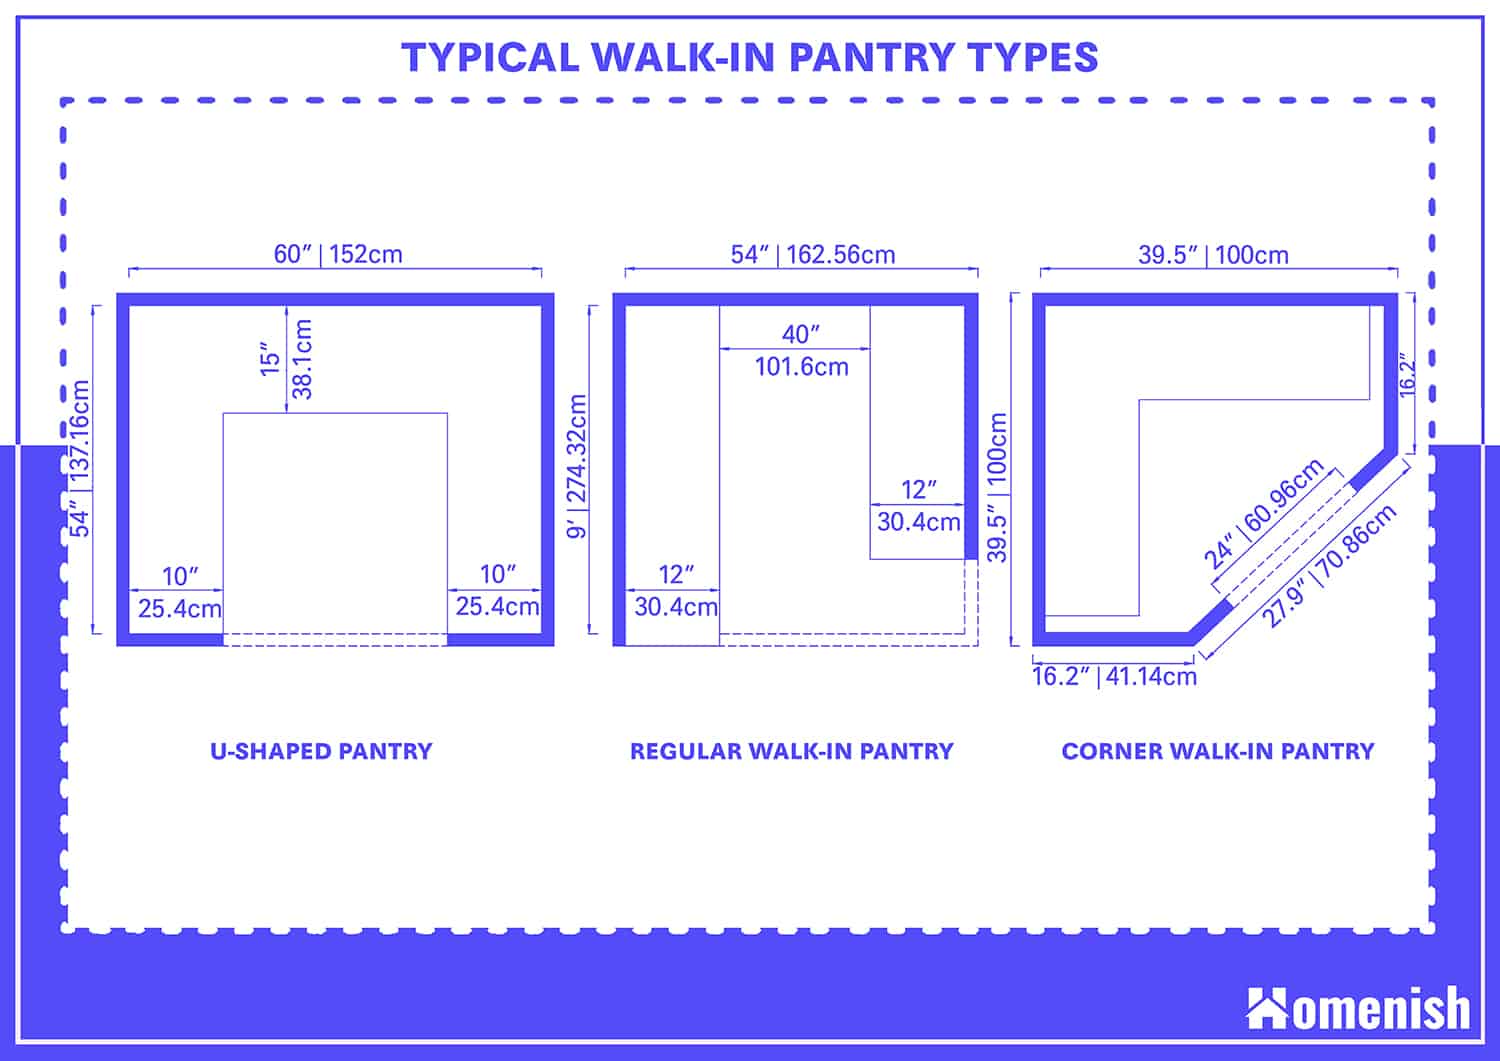 Typical Walk-in Pantry Types